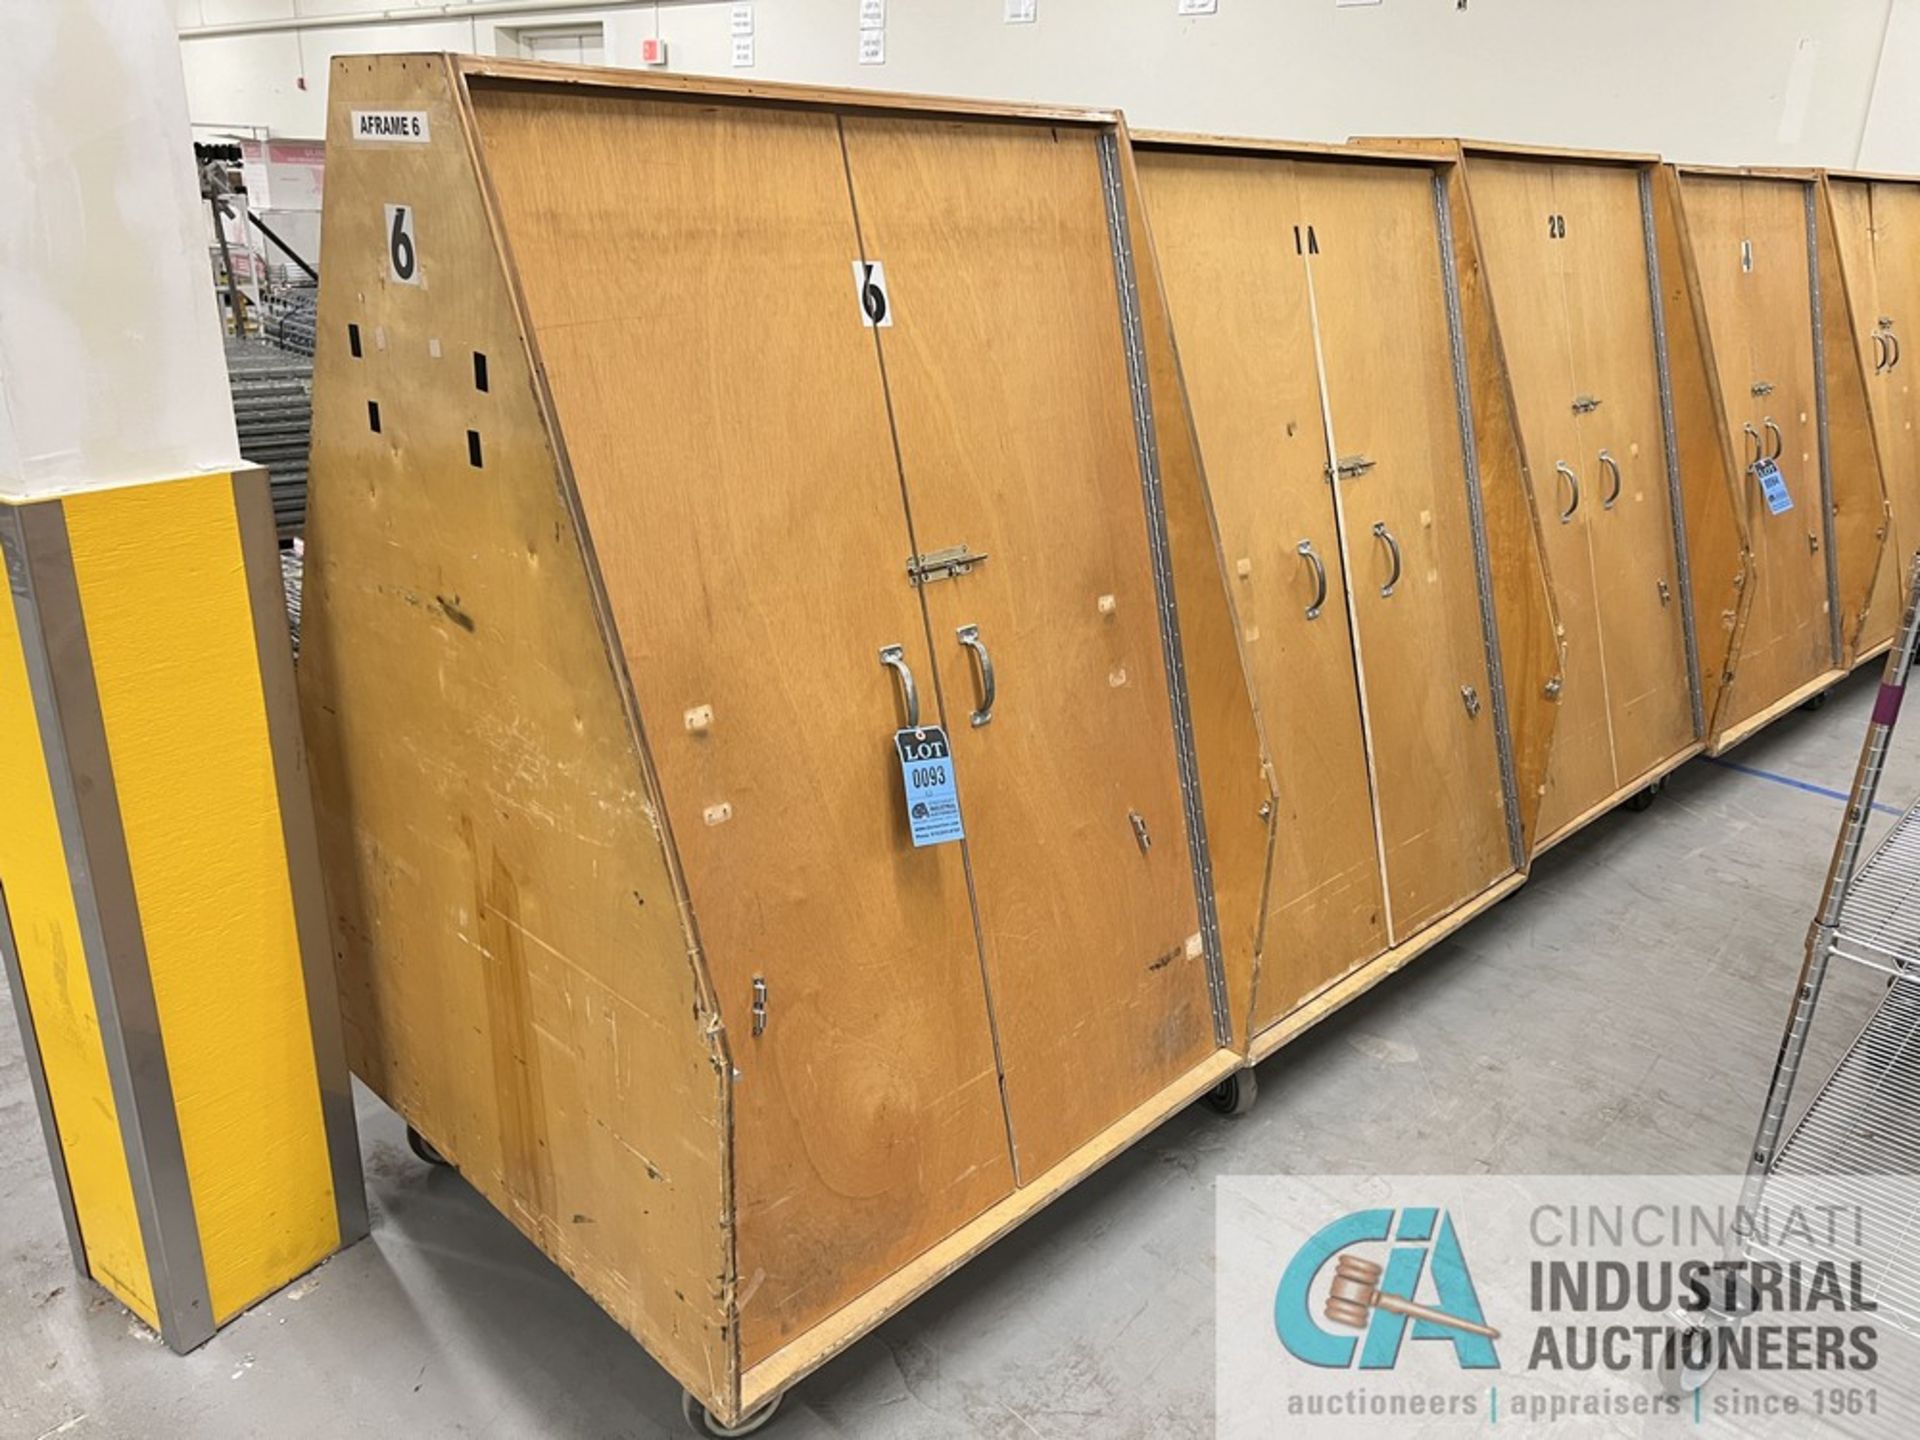 44" X 44" X 68" WOOD ENCLOSED A-FRAME CABINETS (WAREHOUSE)